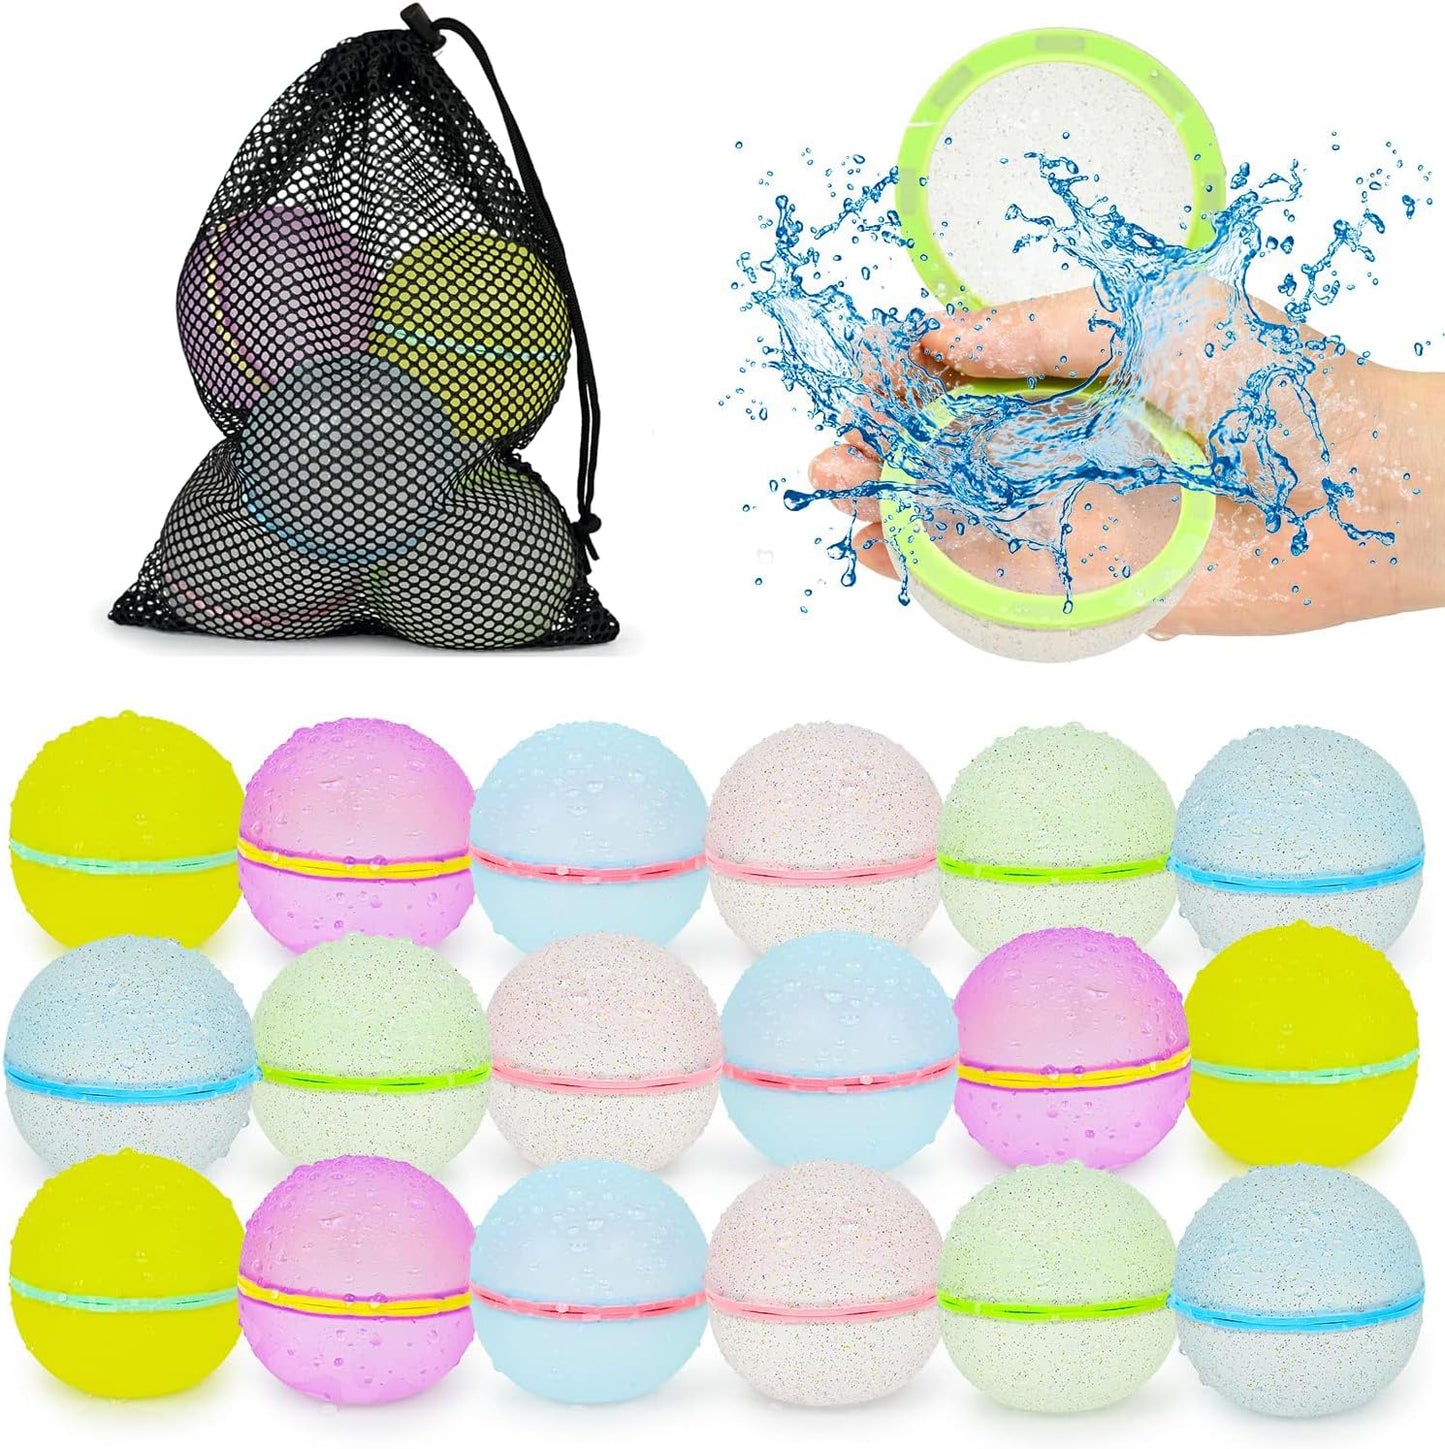 Reusable Water Balloons 12Pcs with Mesh Bag, Self Sealing Silicone Ball Latex-Free, No Clean Hassle, Easy to Fill, Summer Toys Water Toy Swimming Pool Beach Park Yard Outdoor Games Party Supplies